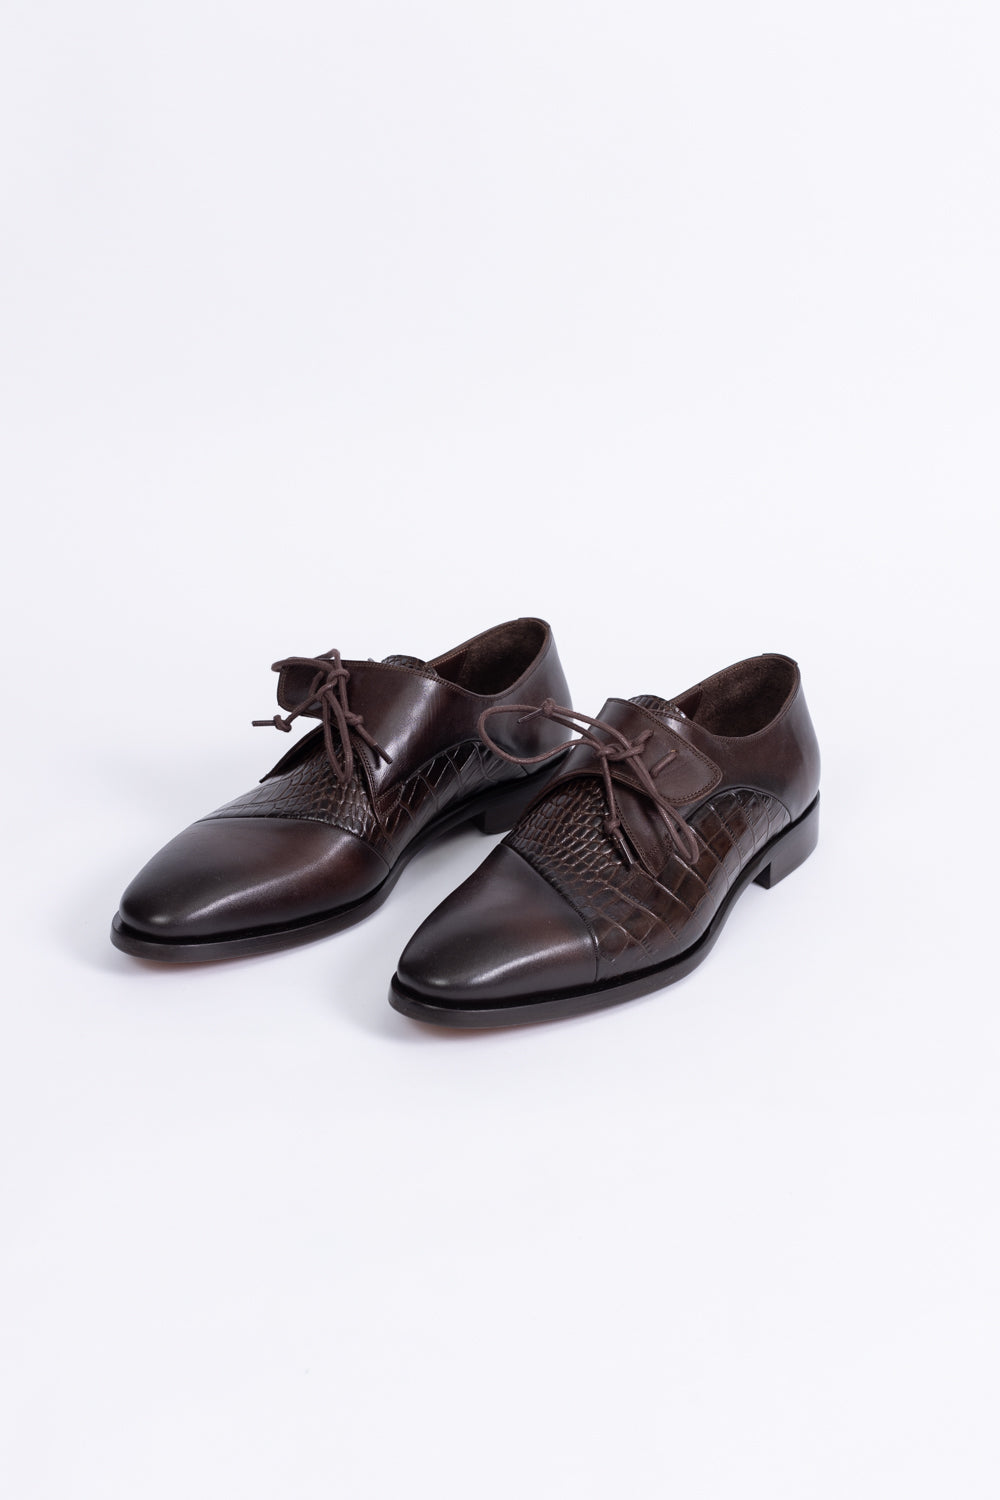 Classic Leather Oxford Shoes 153